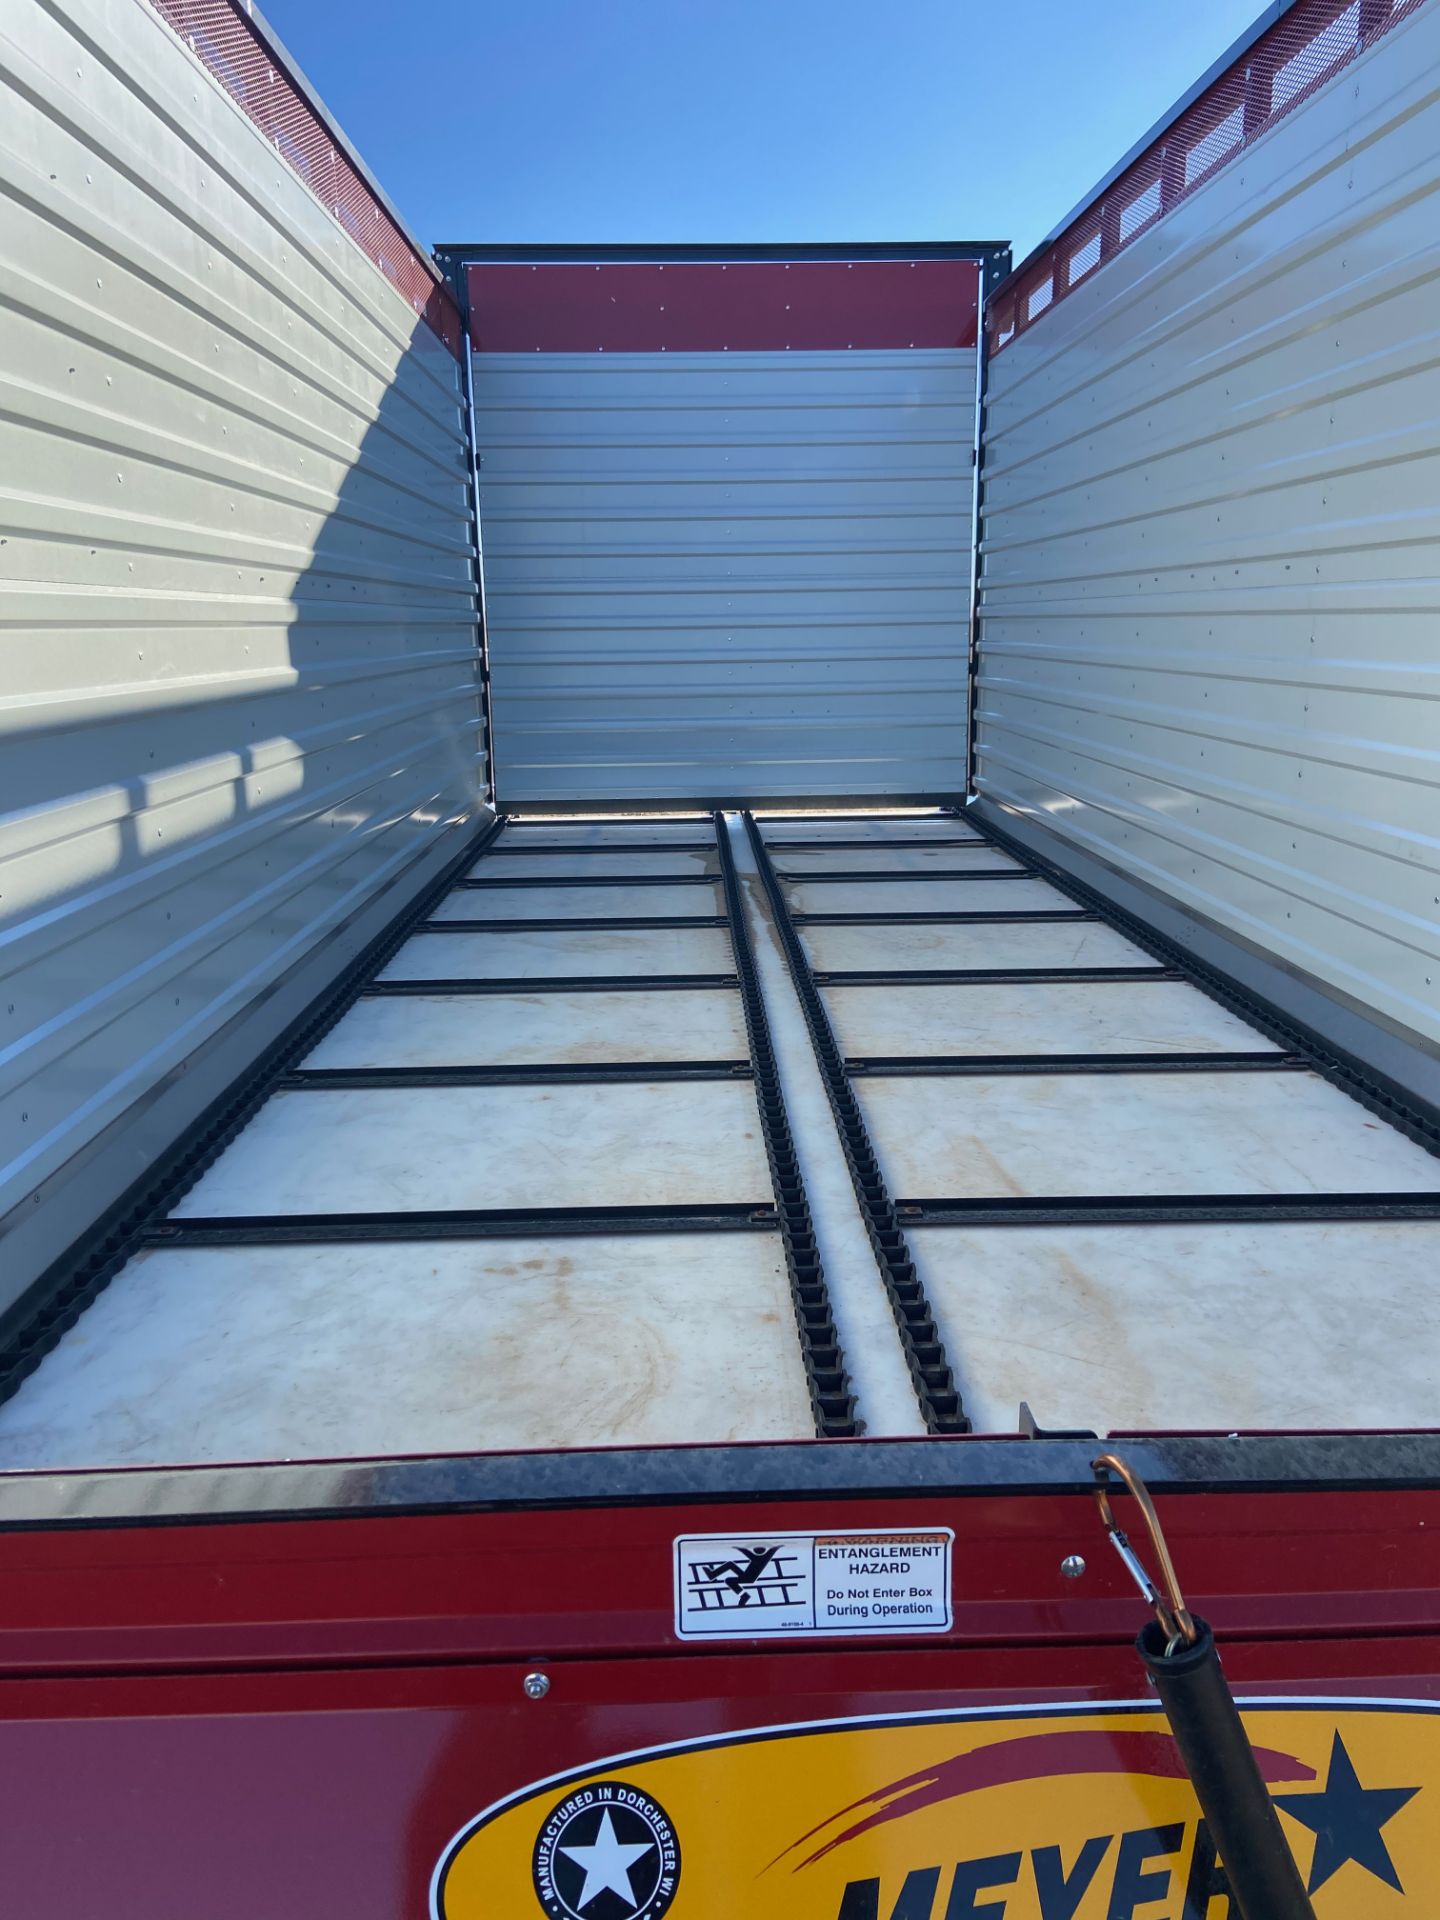 LIKE NEW Meyer Manufacturing Live Floor Rear Unload Forage Box, Serial# 1919DRX213, Rigging/ Loading - Image 4 of 8